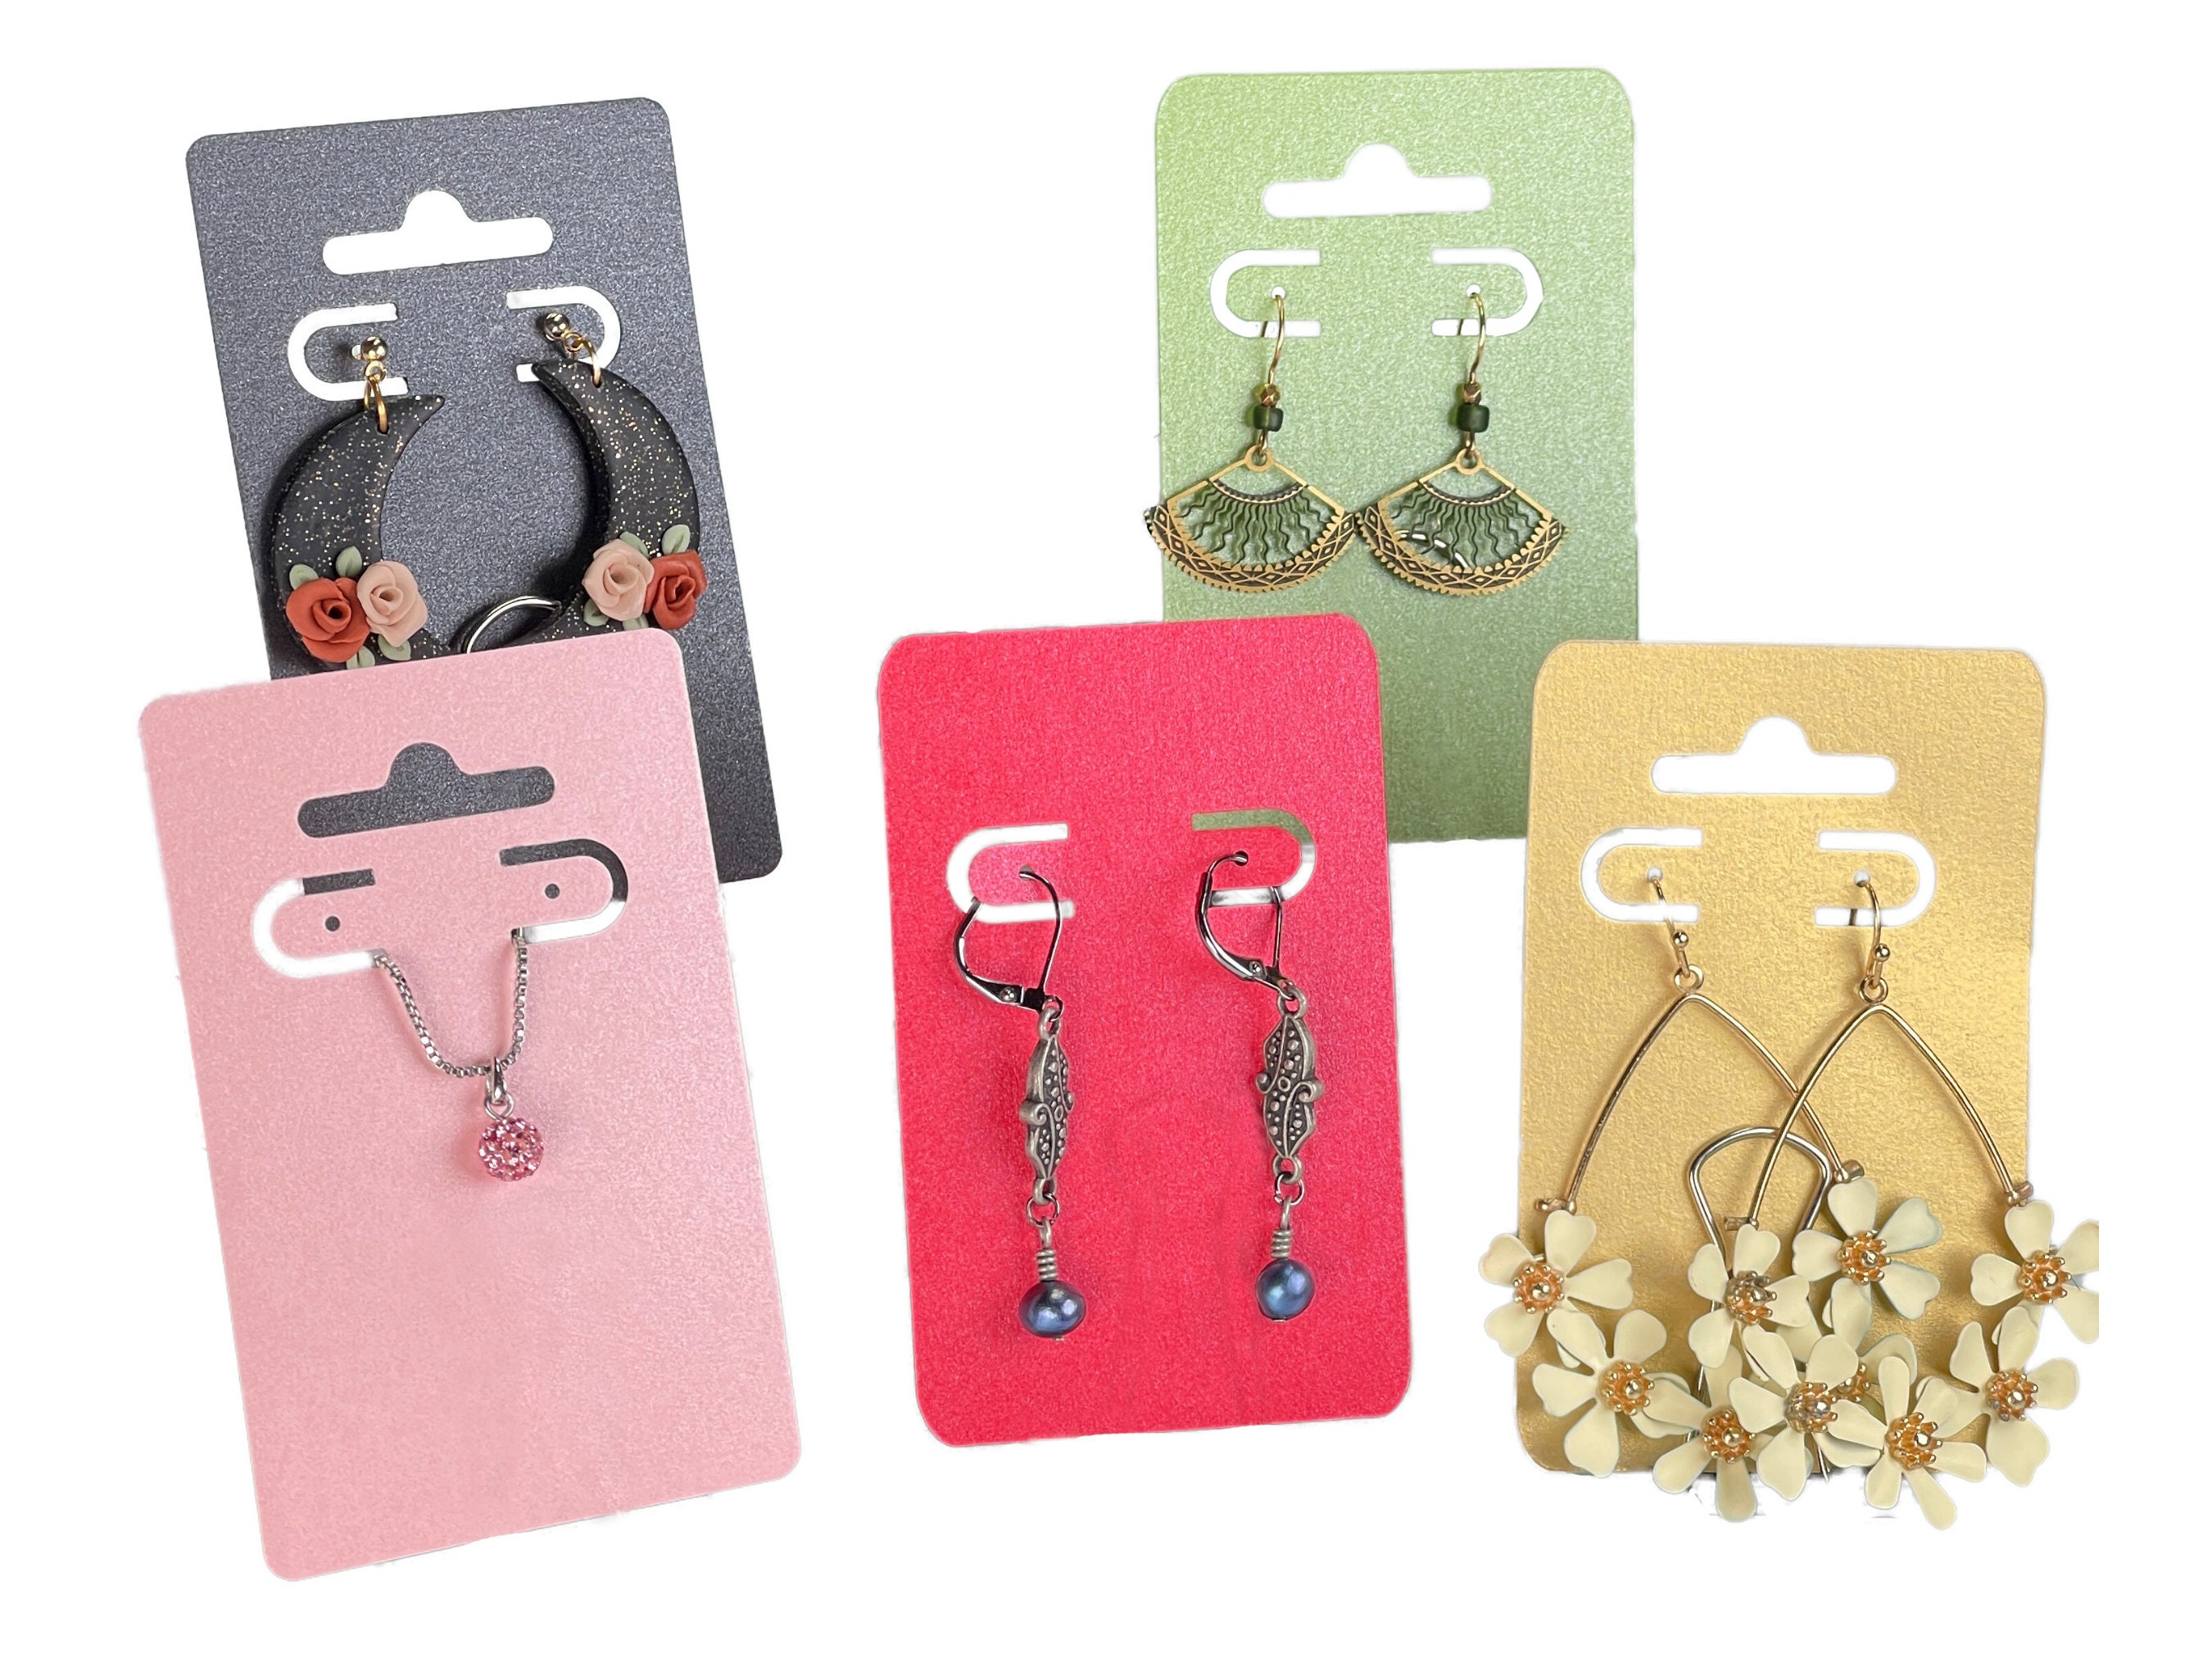  100 Pcs Earring Cards for Selling Hanging Earring Display Cards  Kraft Paper Earring Card Holder Blank Paper Cards with 6 Holes Cardboard  Earring Holders for Selling Earring DIY Crafts Retail 